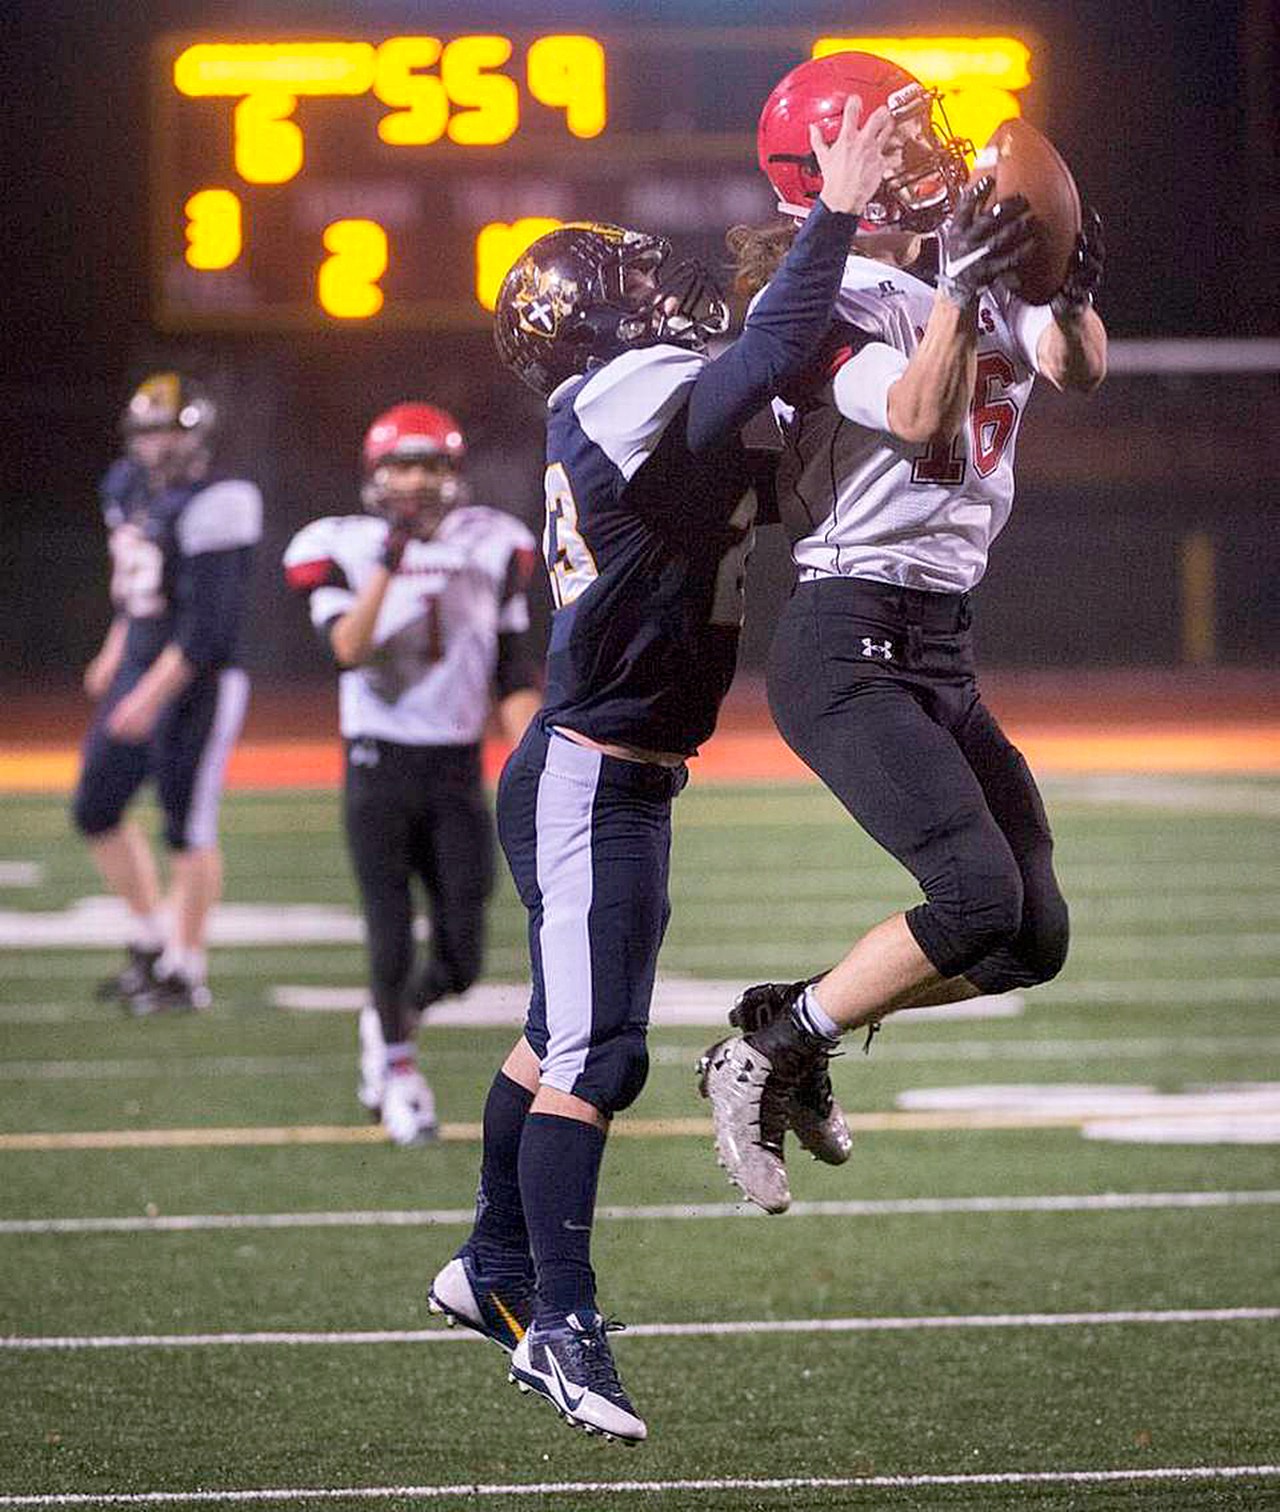 McClatchy News Service Neah Bay’s Cole Svec intercepts a pass in front of Tacoma Baptist receiver Doug Stone near the end of the first half of the Red Devils’ 66-26 victory.